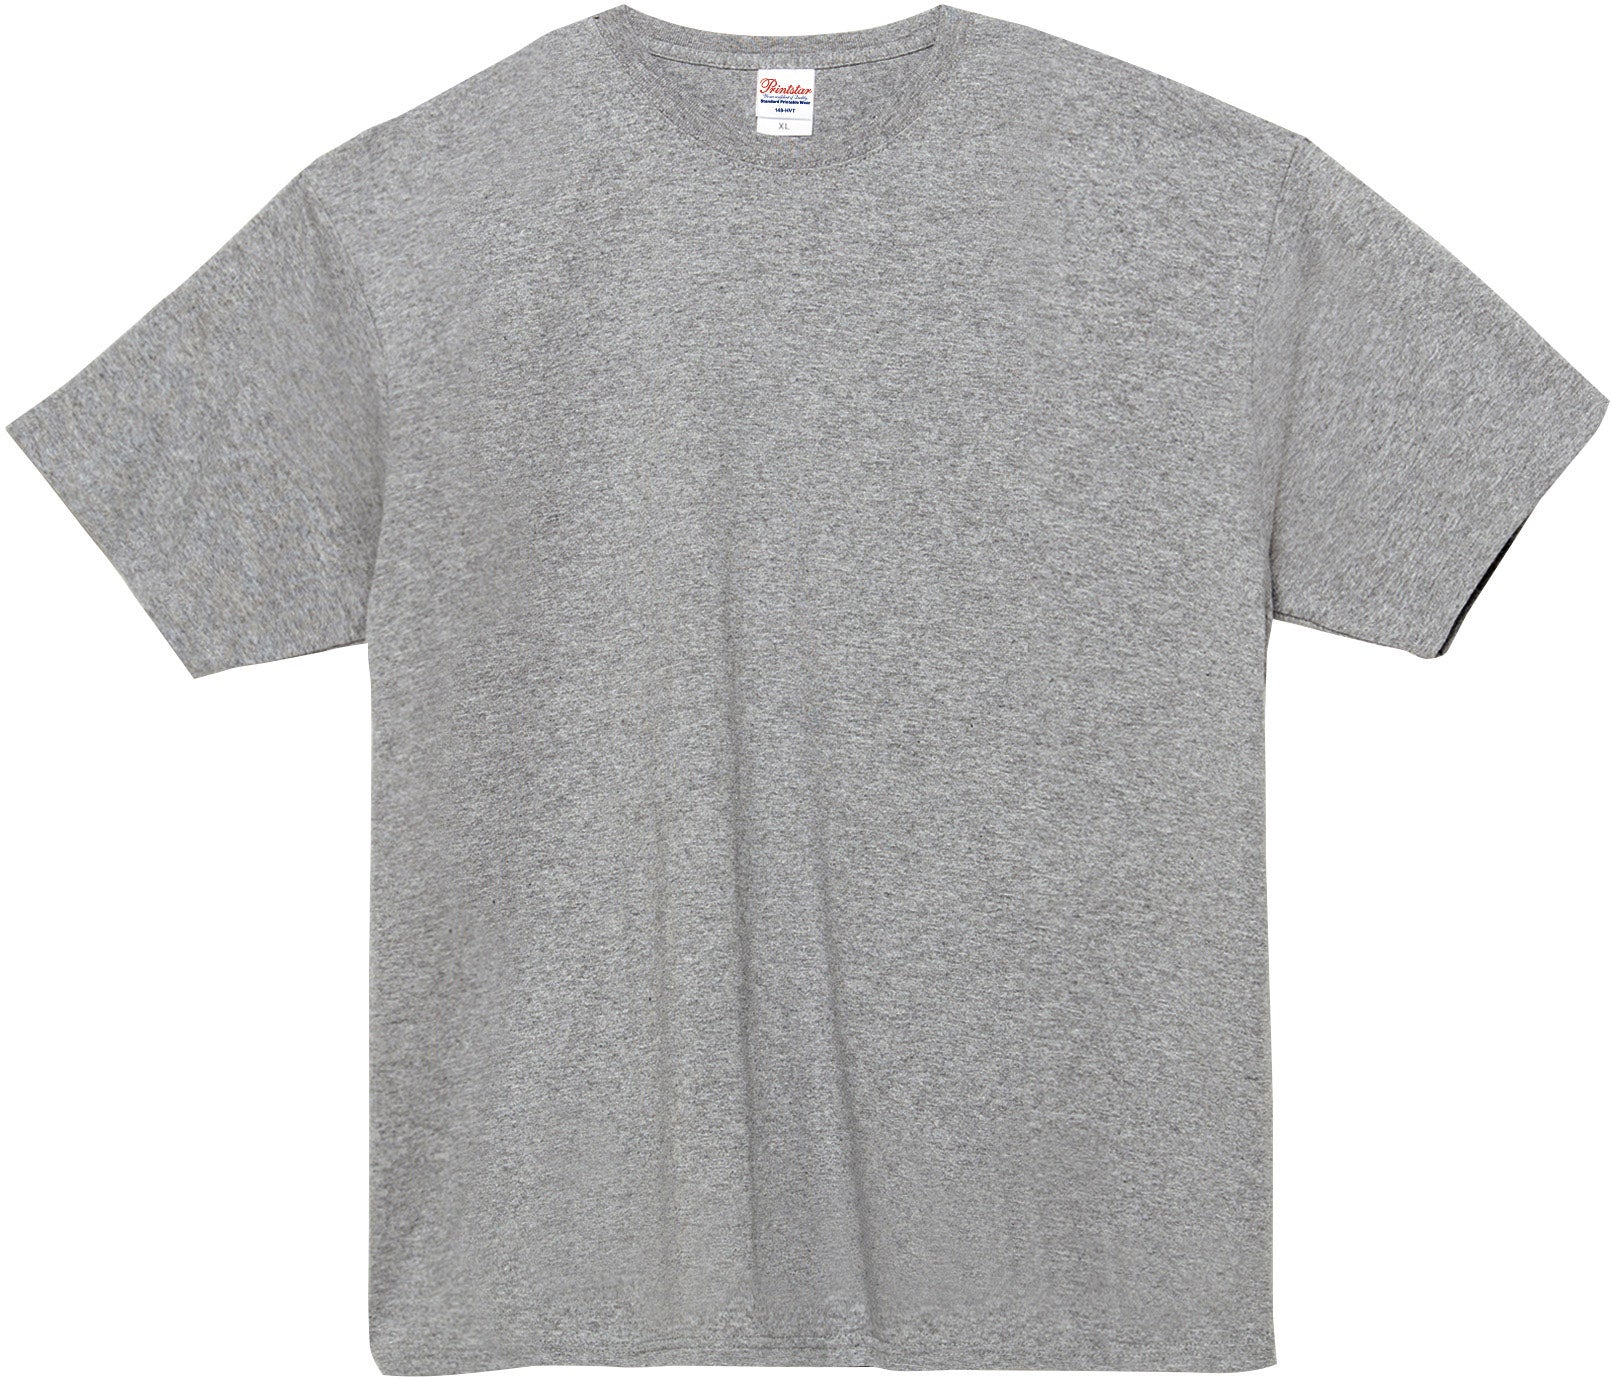 Printstar [*00148-HVT] 7.4 T-shirts – Heavy Apparel Merchandise Weight Corporate and oz Sustainable Super